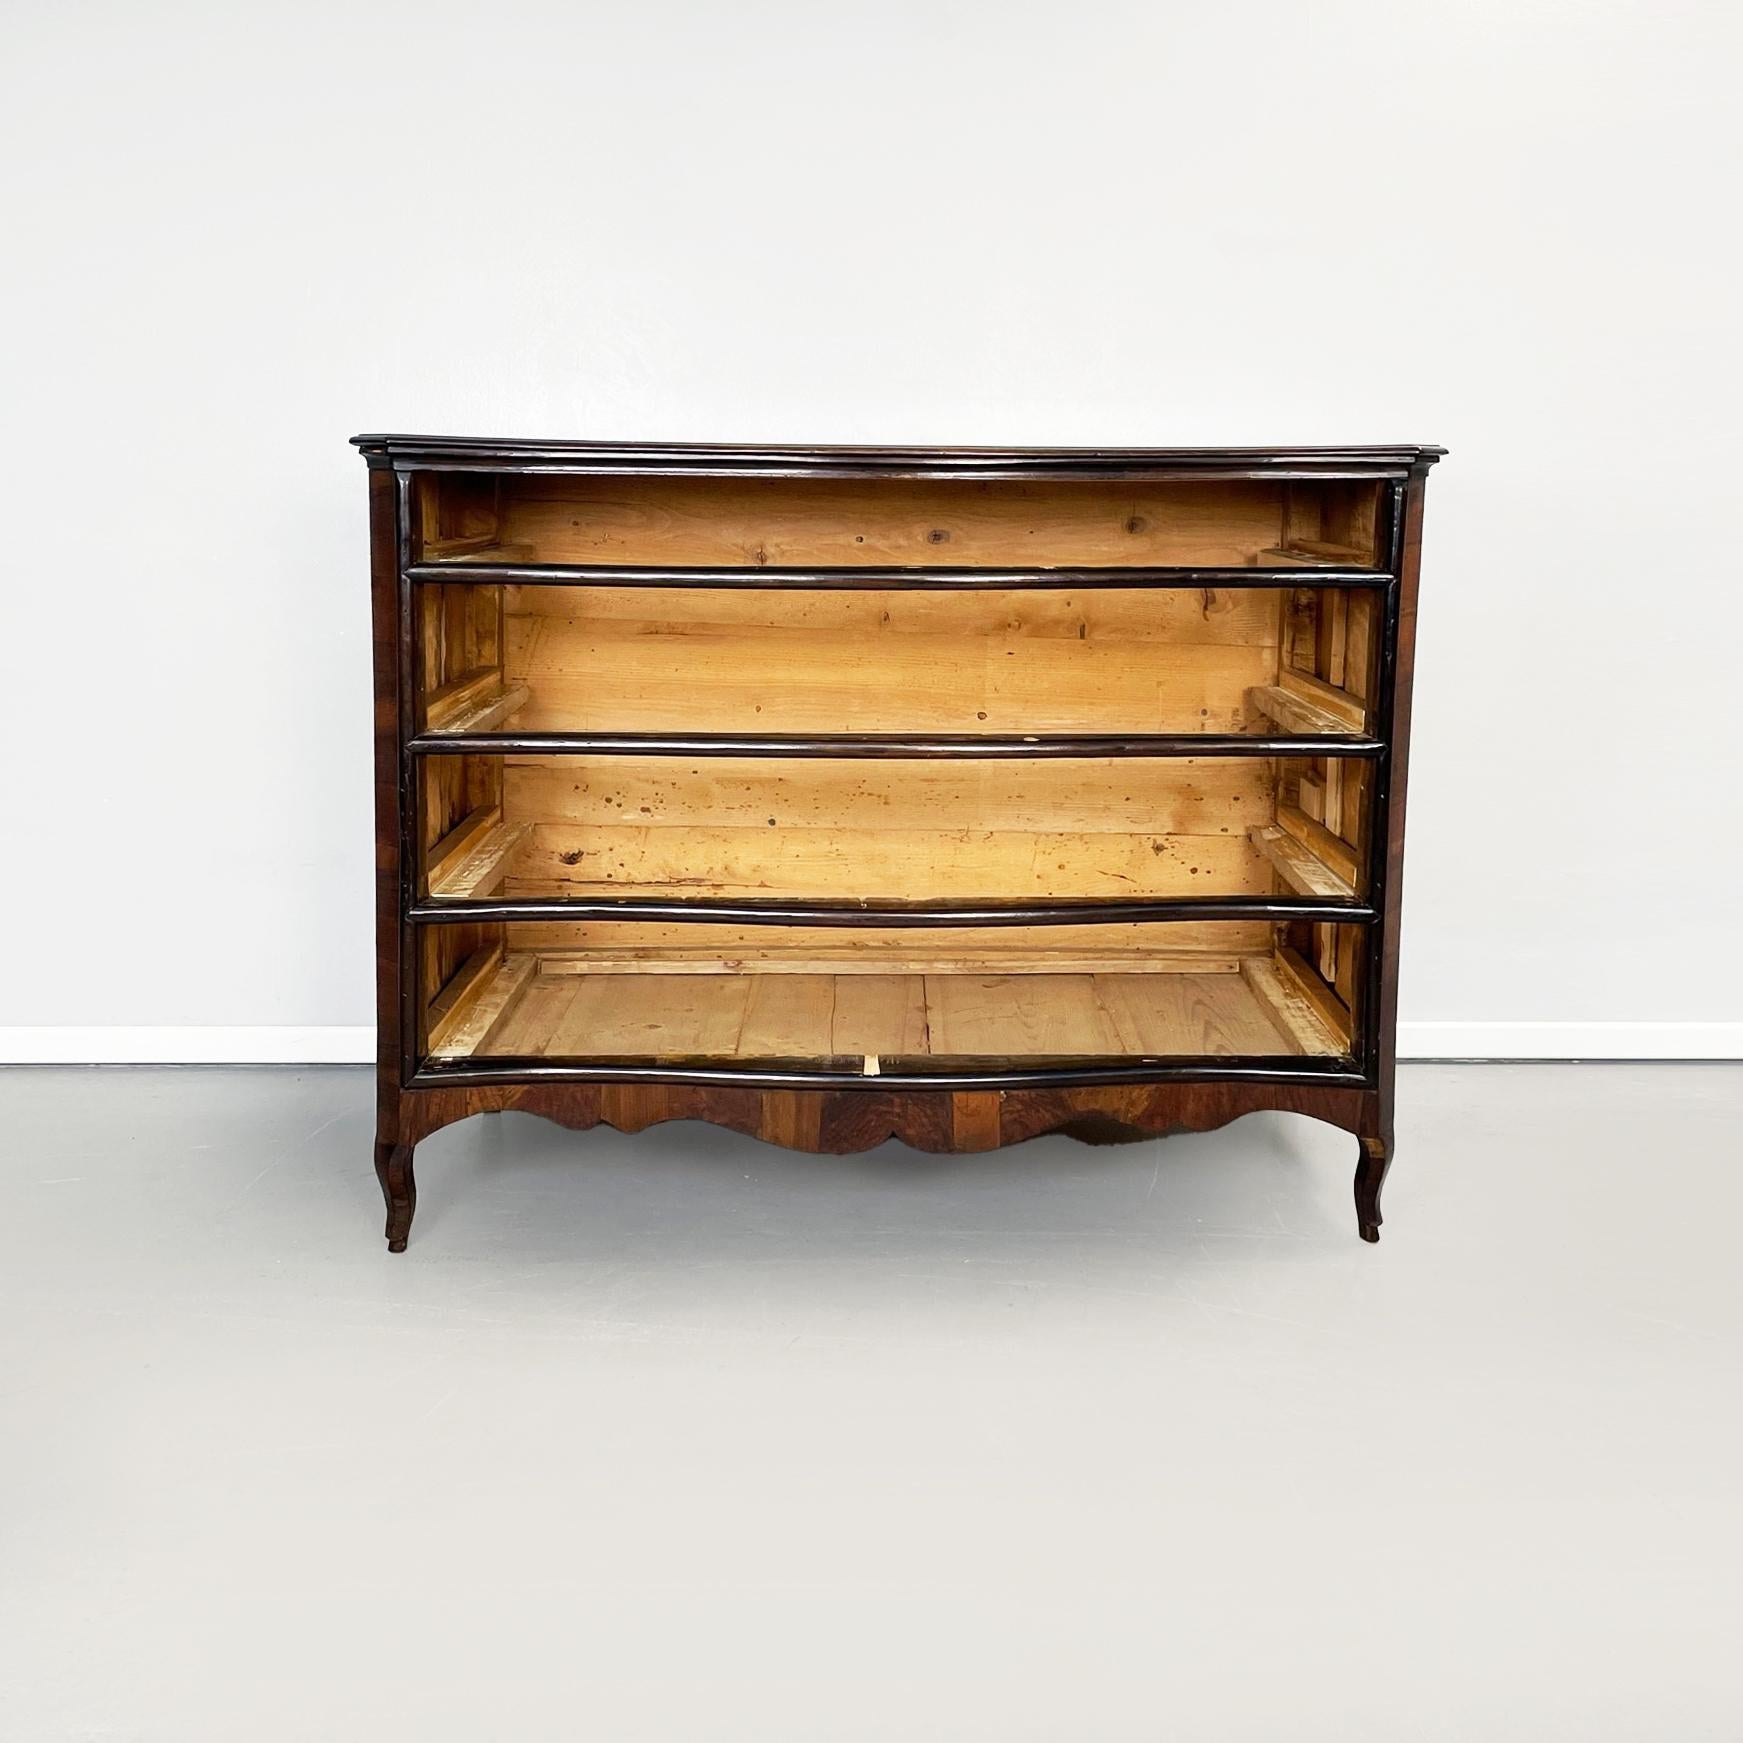 Italian baroque chests of drawers in wood and metal, 1730-1740s For Sale 13